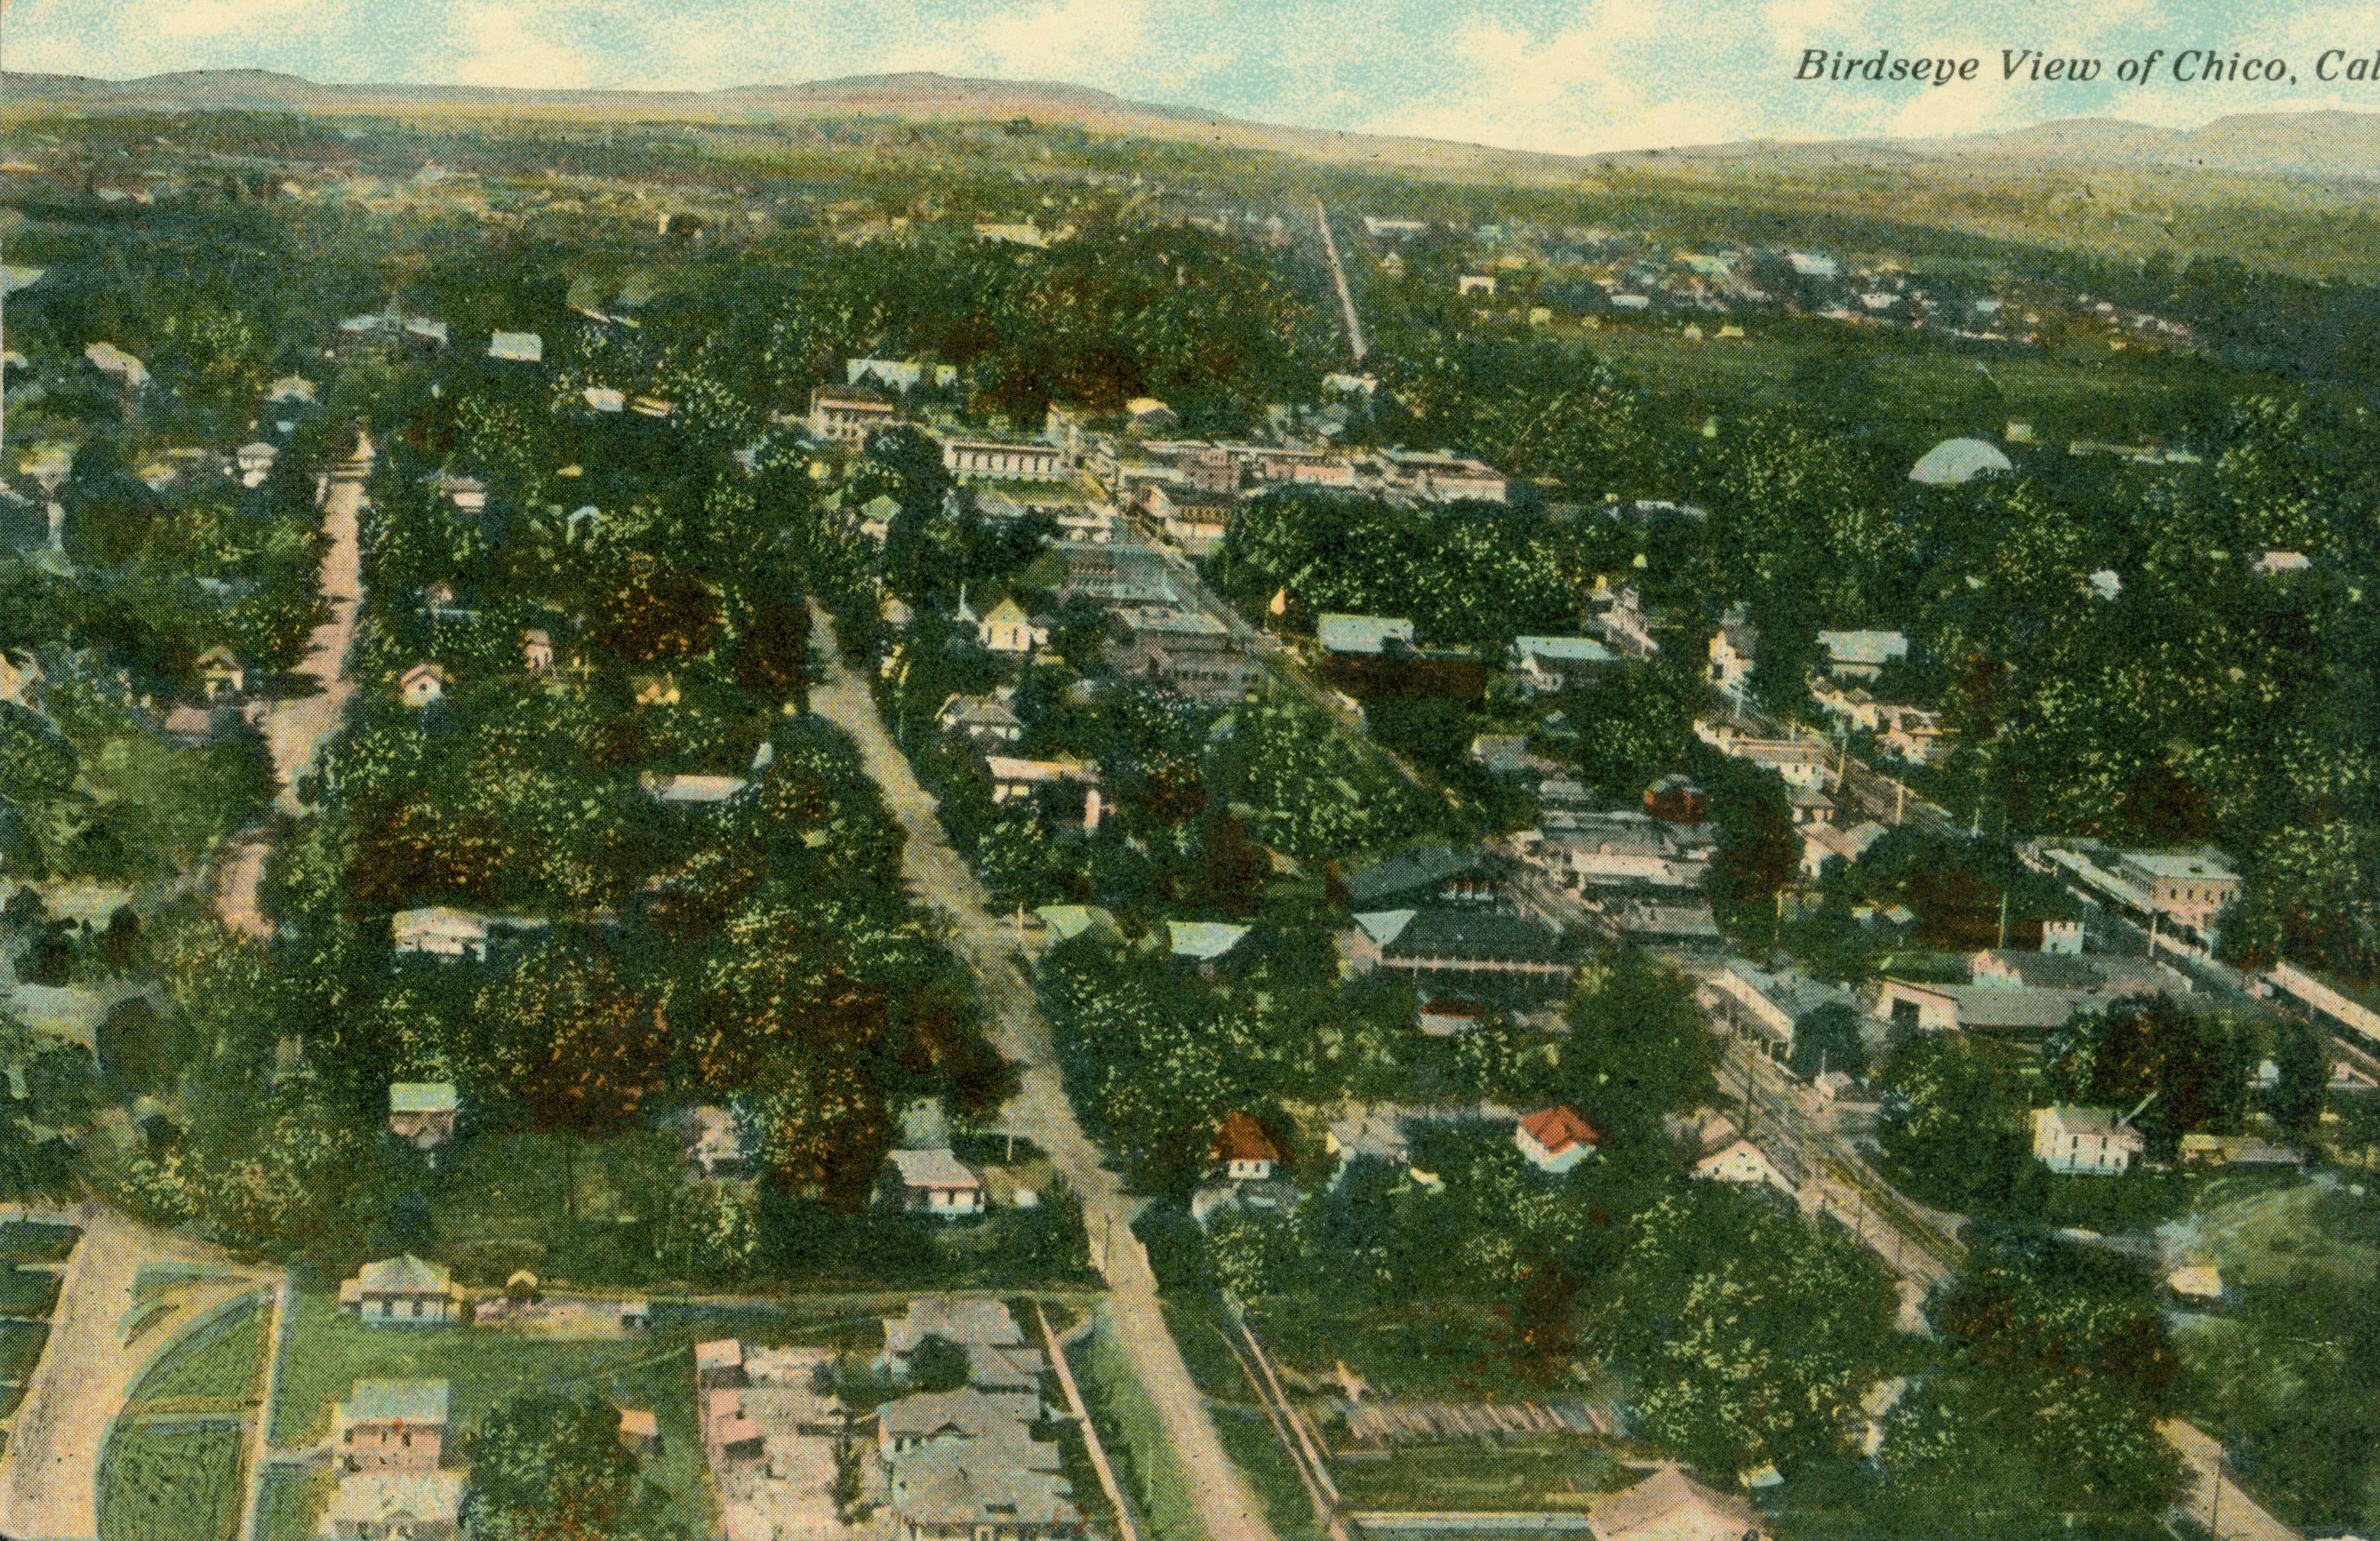 Shows a bird's eye view of Chico